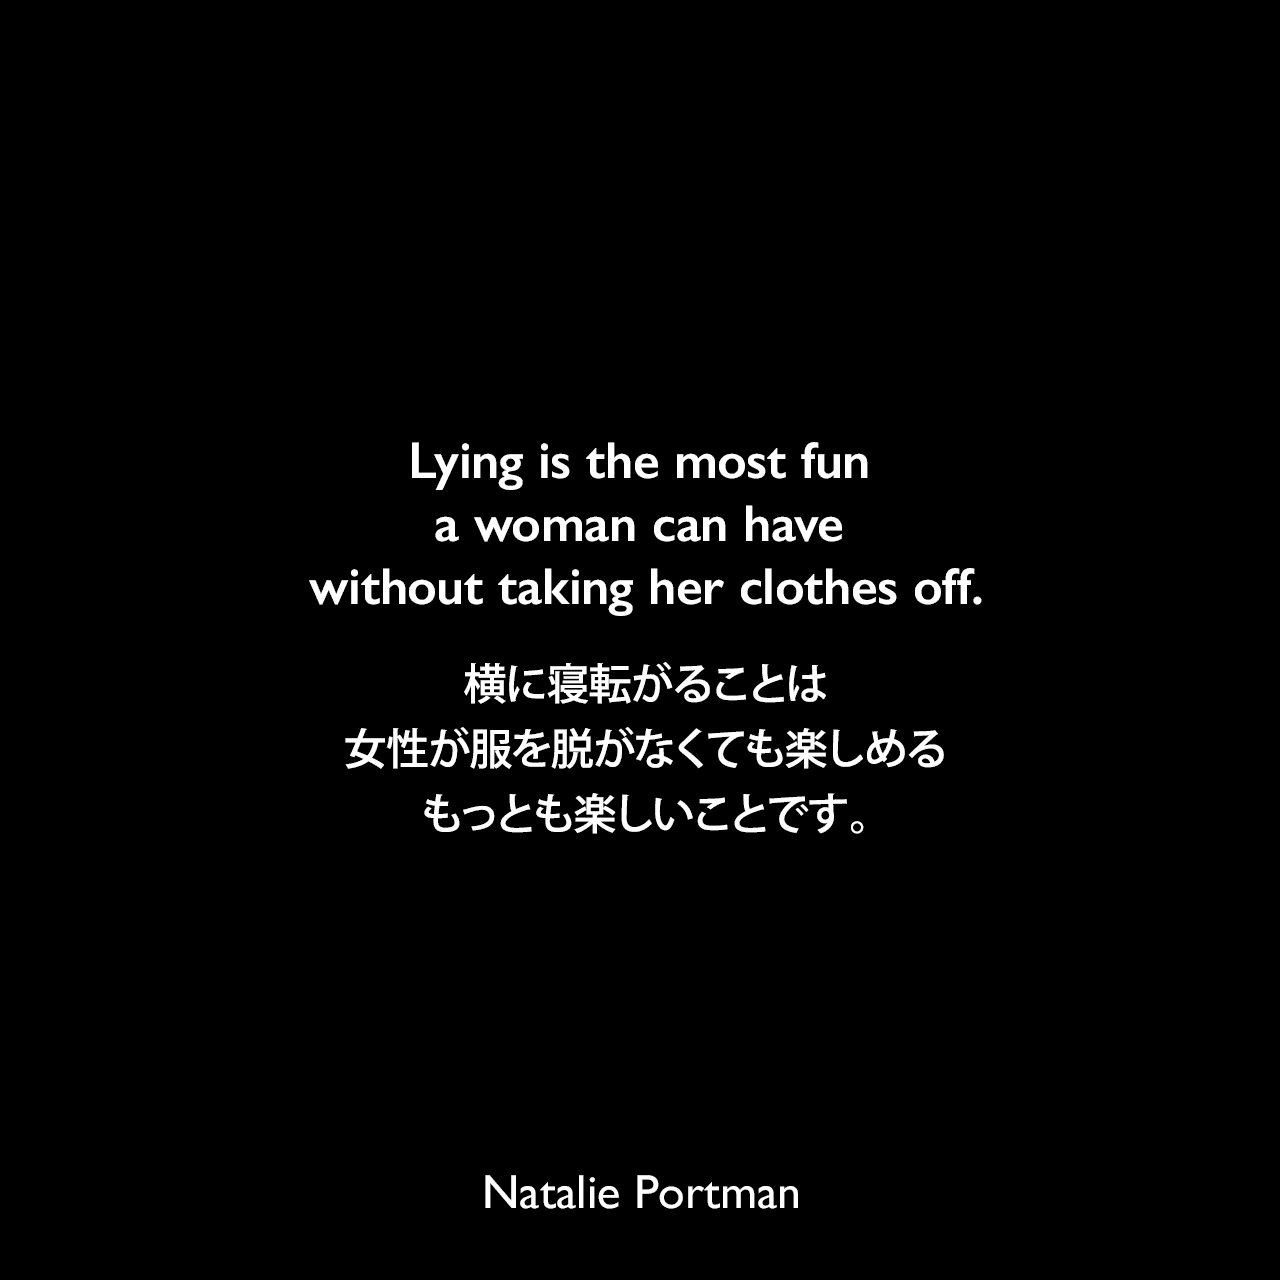 Lying is the most fun a woman can have without taking her clothes off.横に寝転がることは、女性が服を脱がなくても楽しめるもっとも楽しいことです。Natalie Portman